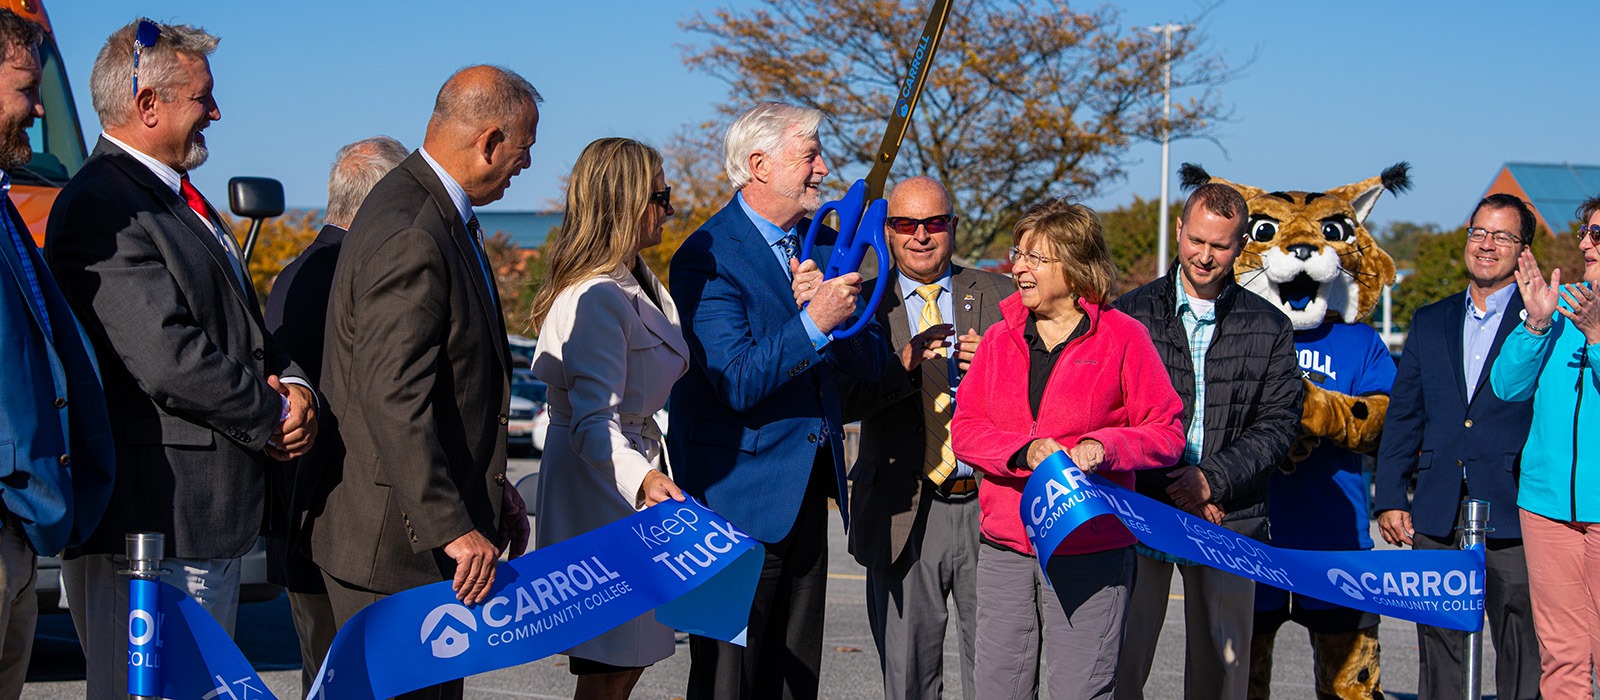 Commercial Truck Driver Ribbon Cutting Carroll Community College